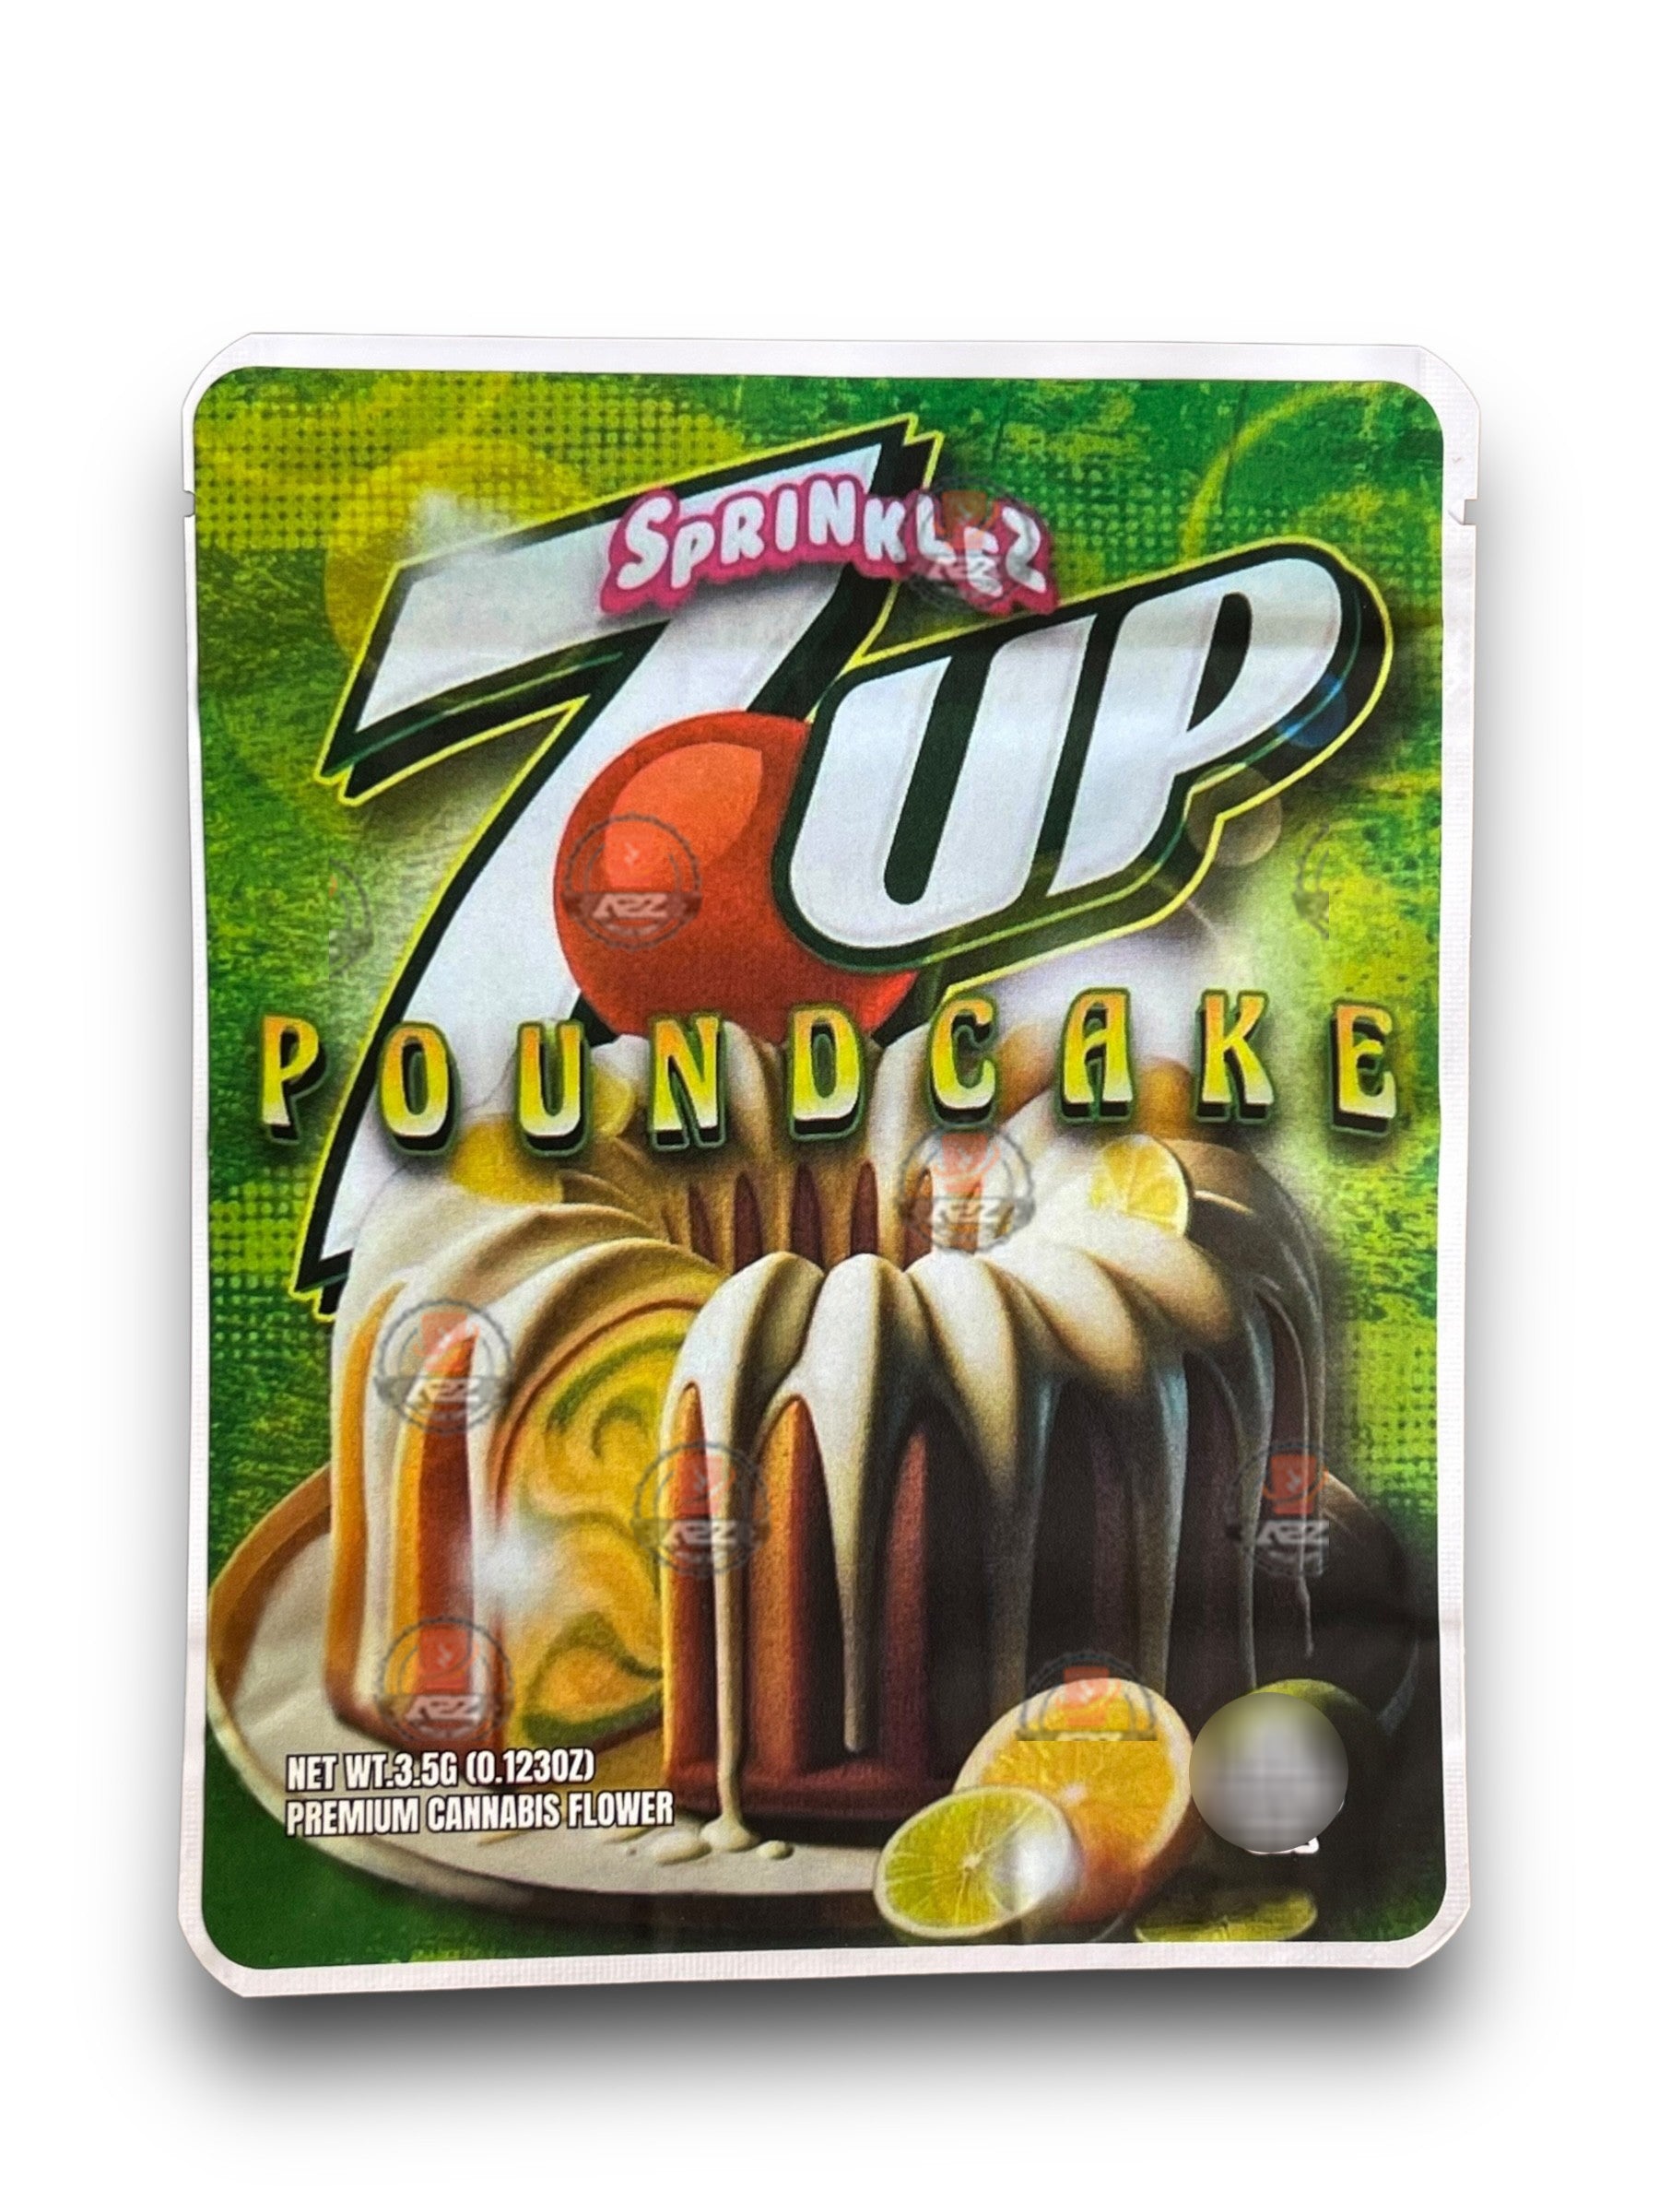 Sprinklez 7 UP Pound Cake 3.5G Mylar Bags -With stickers and label 7UP